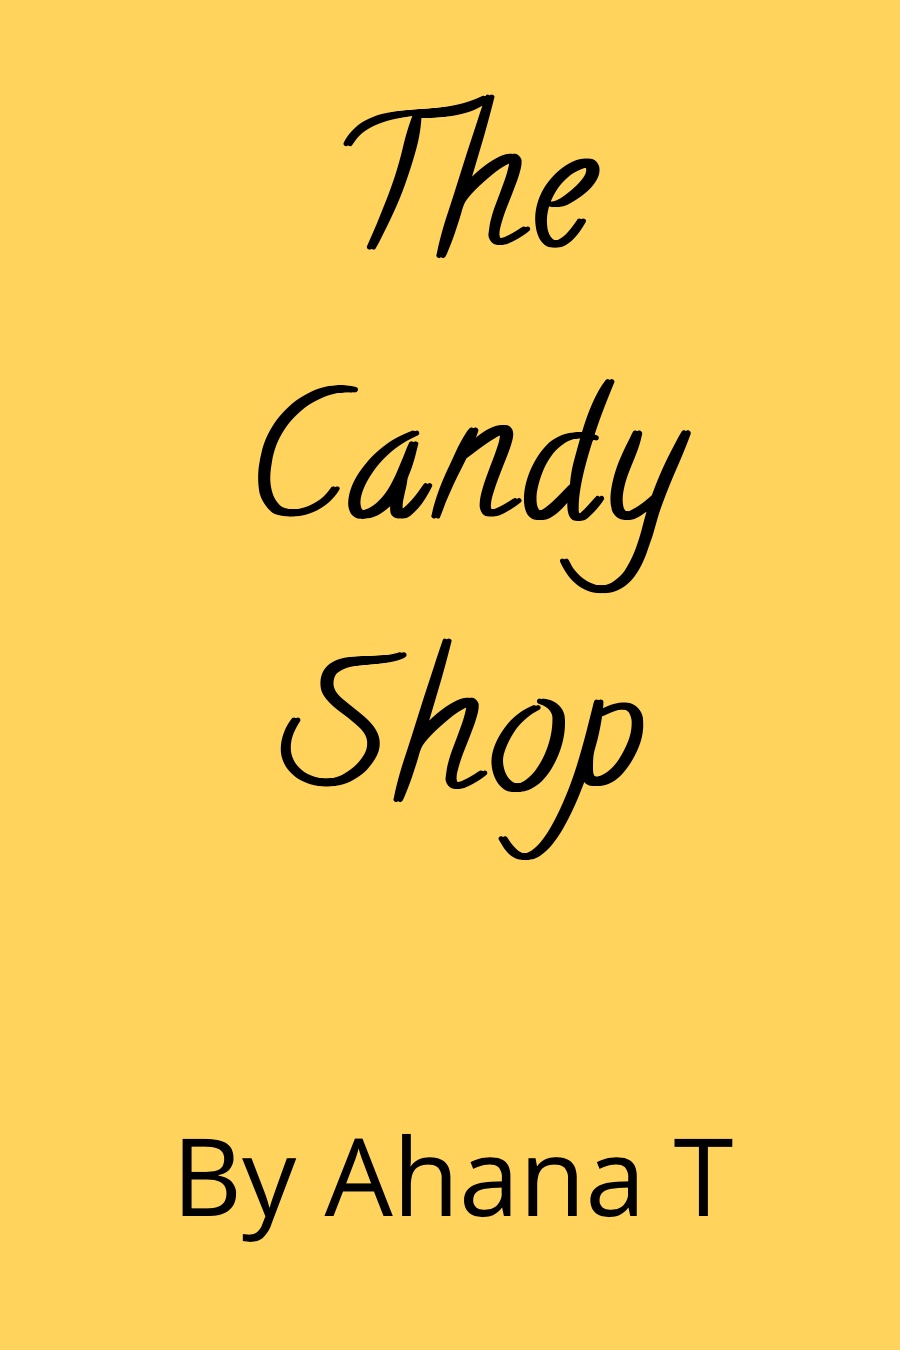 The Candy Shop by Ahana T